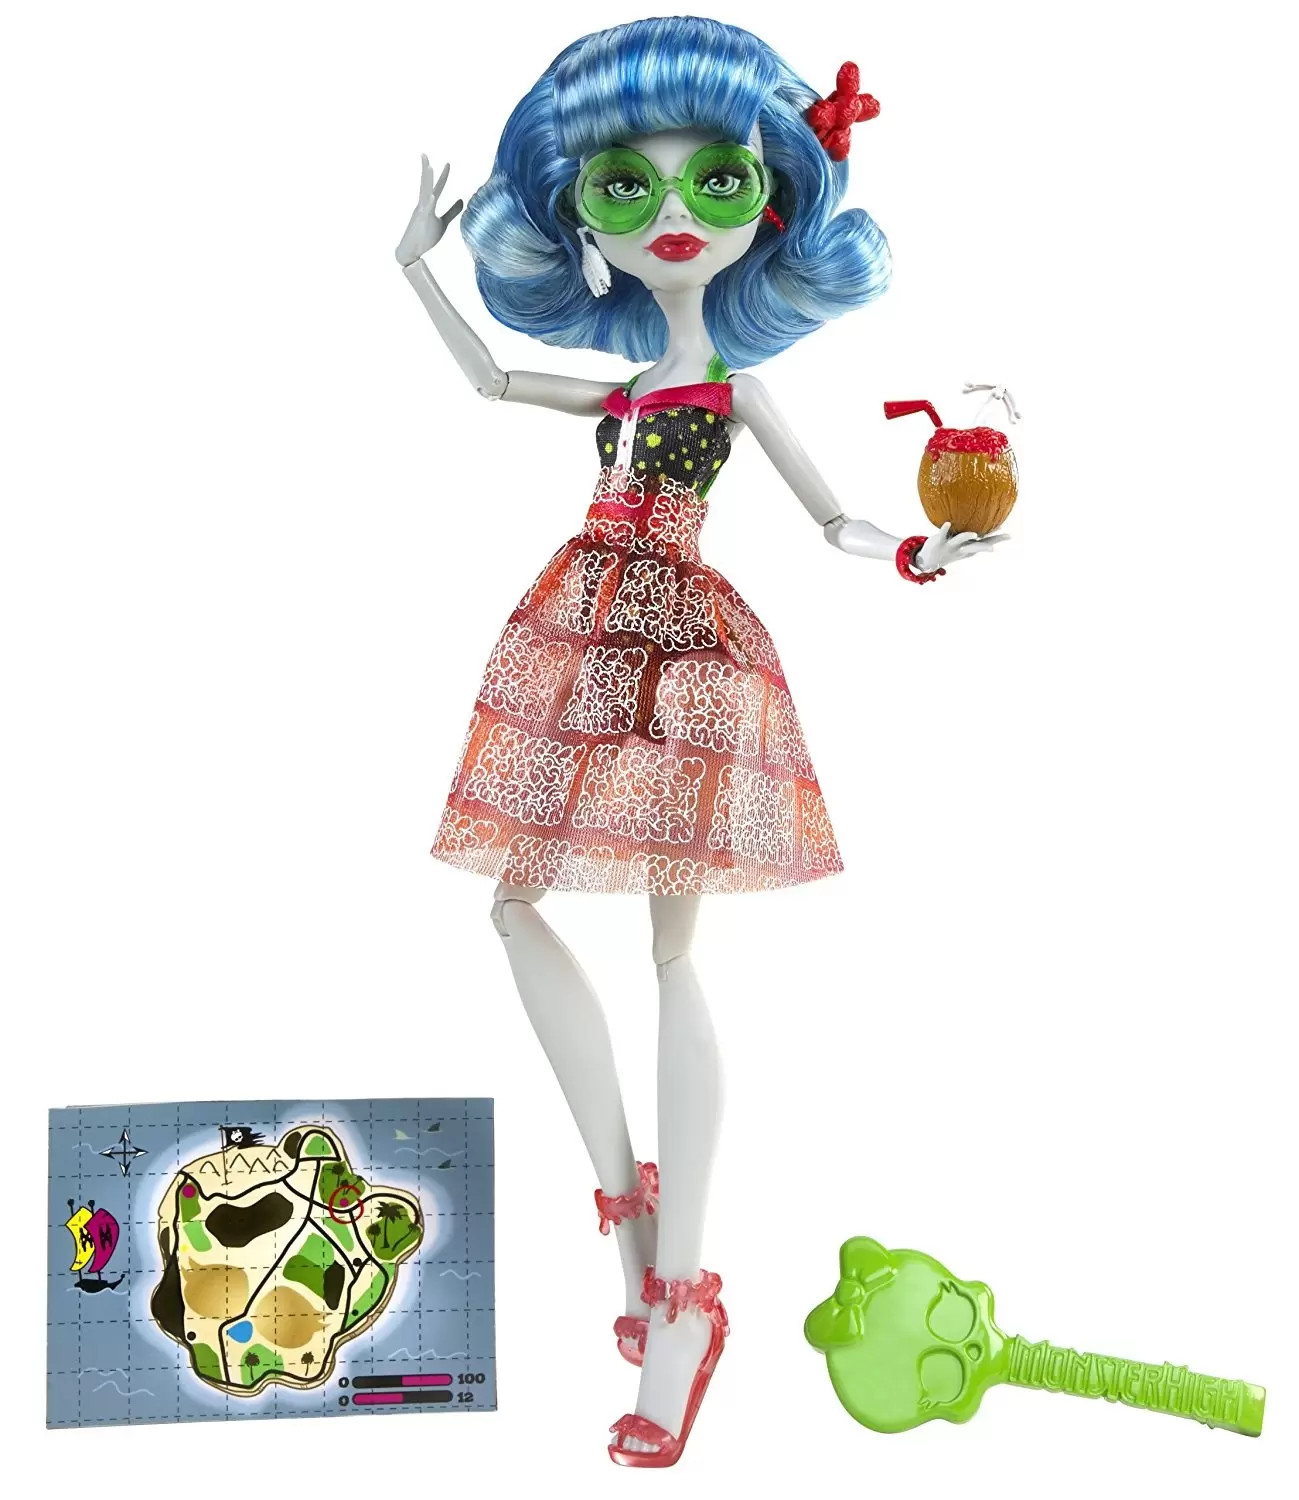 Monster High - Ghoulia Yelps - Skull Shores